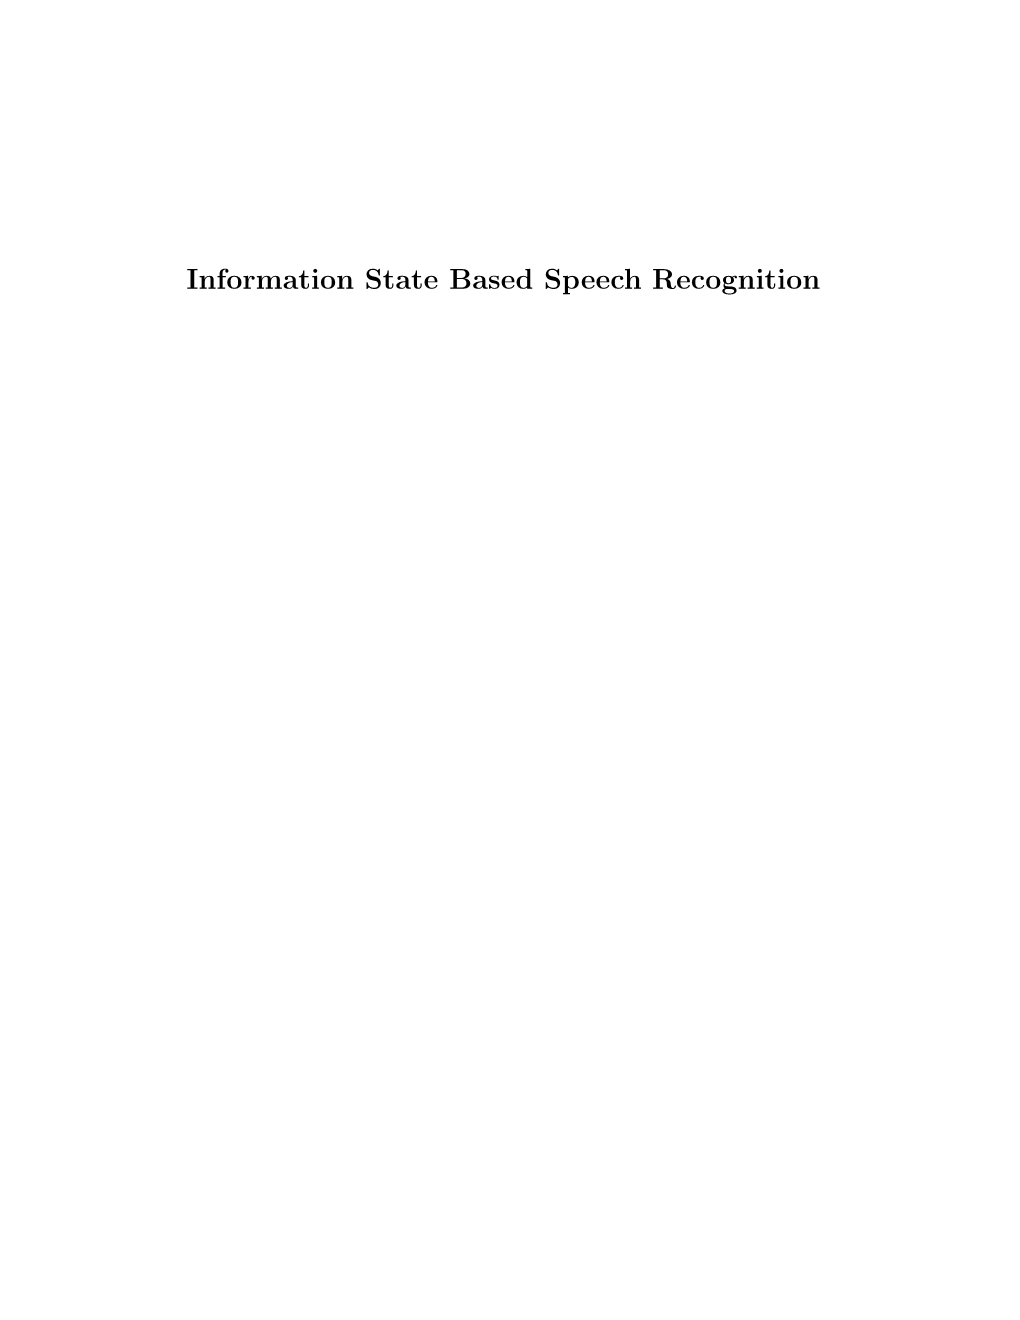 Information State Based Speech Recognition